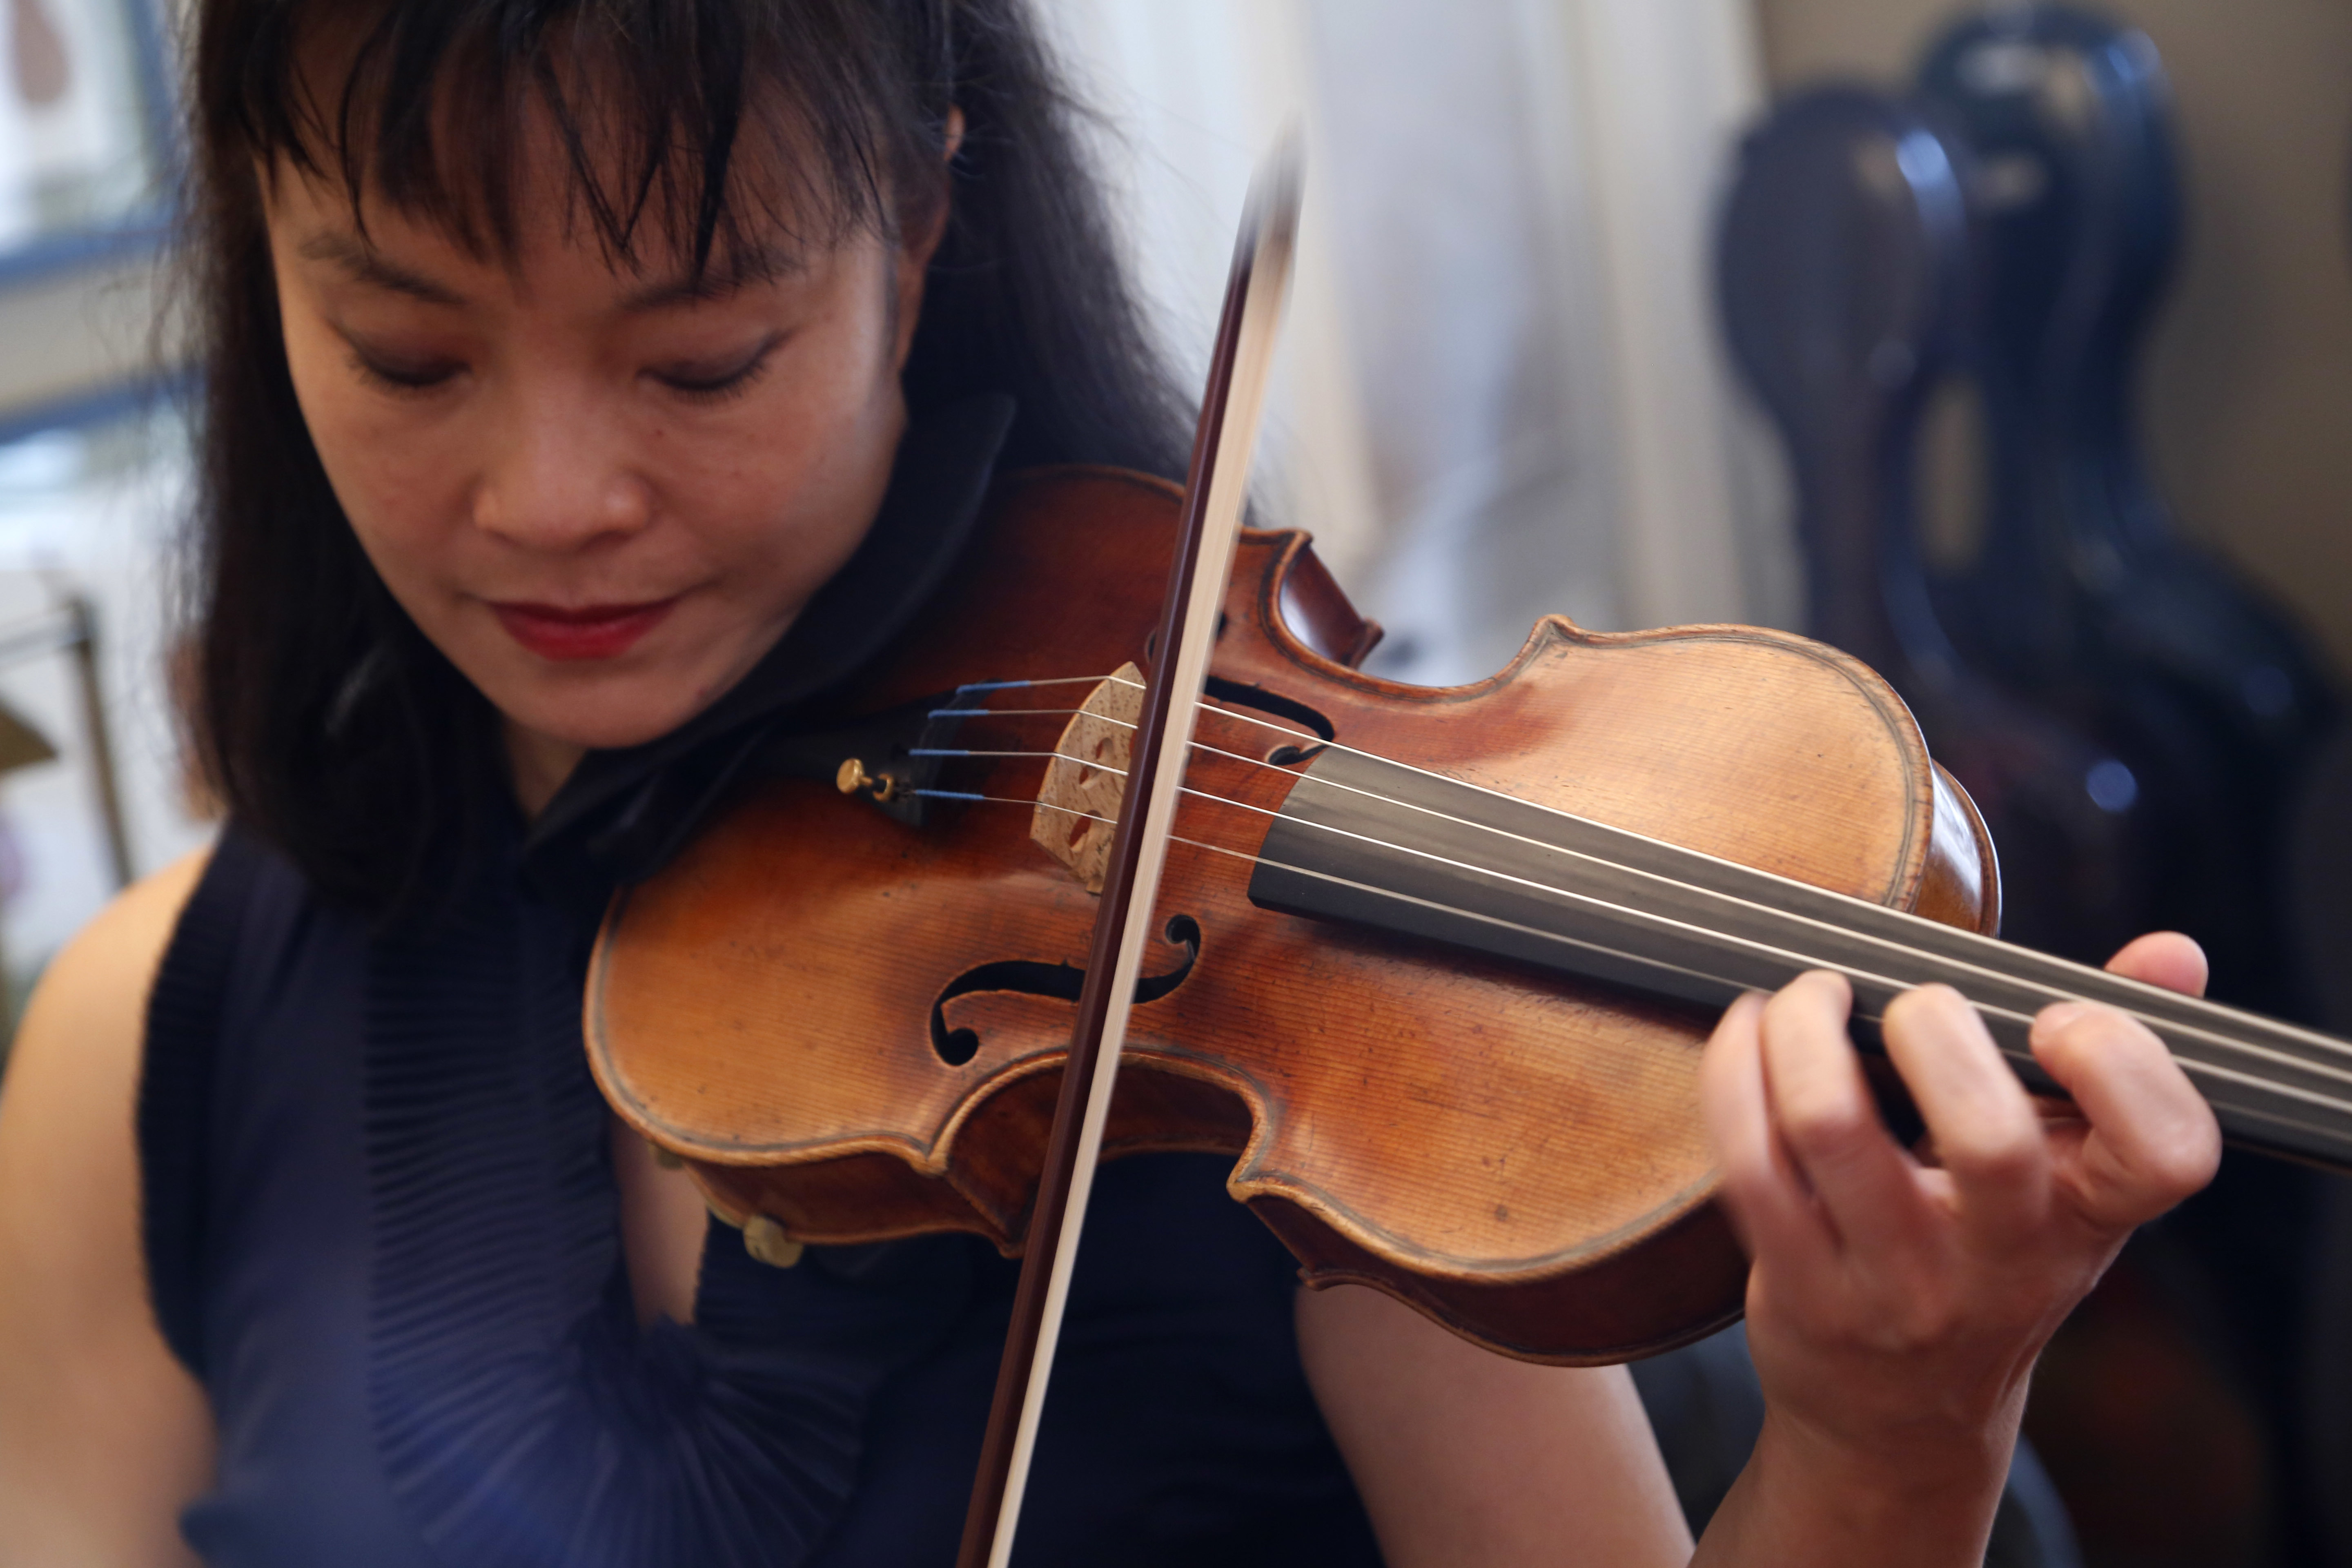 Mira Wang plays the Ames Stradivarius violin in New York, Wednesday, March 8, 2017. After a meticulous restoration that took more than a year, the Ames Stradivarius violin that was stolen from violinist Roman Totenberg is about to return to the stage. Wang, a former student of Totenberg's, played the instrument at a private concert in New York on March 13. (AP Photo/Seth Wenig)